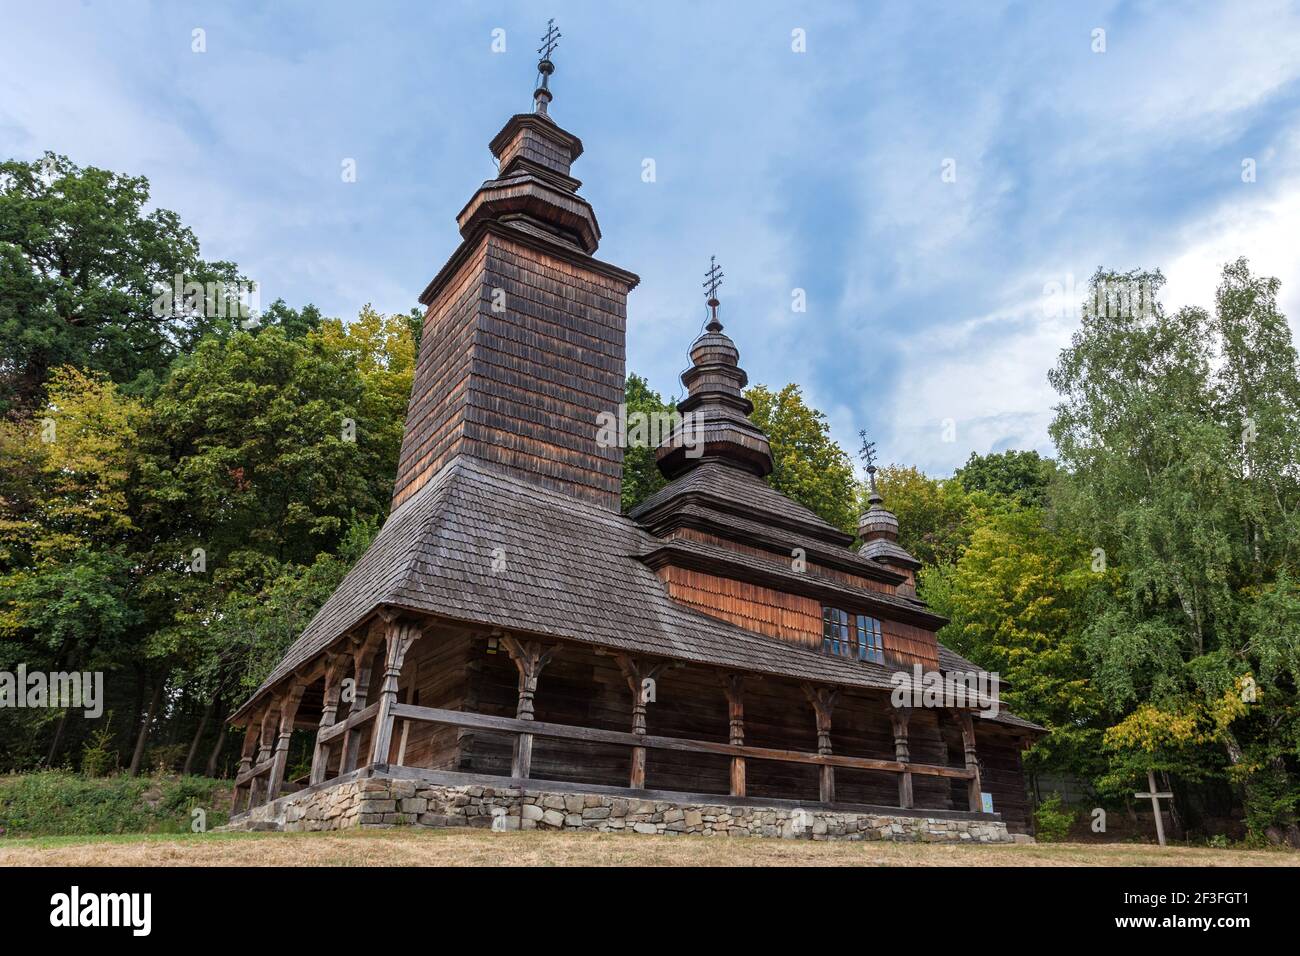 An old wooden church from Western Ukraine in the Kiev Pirogovo Museum of Architecture. Stock Photo